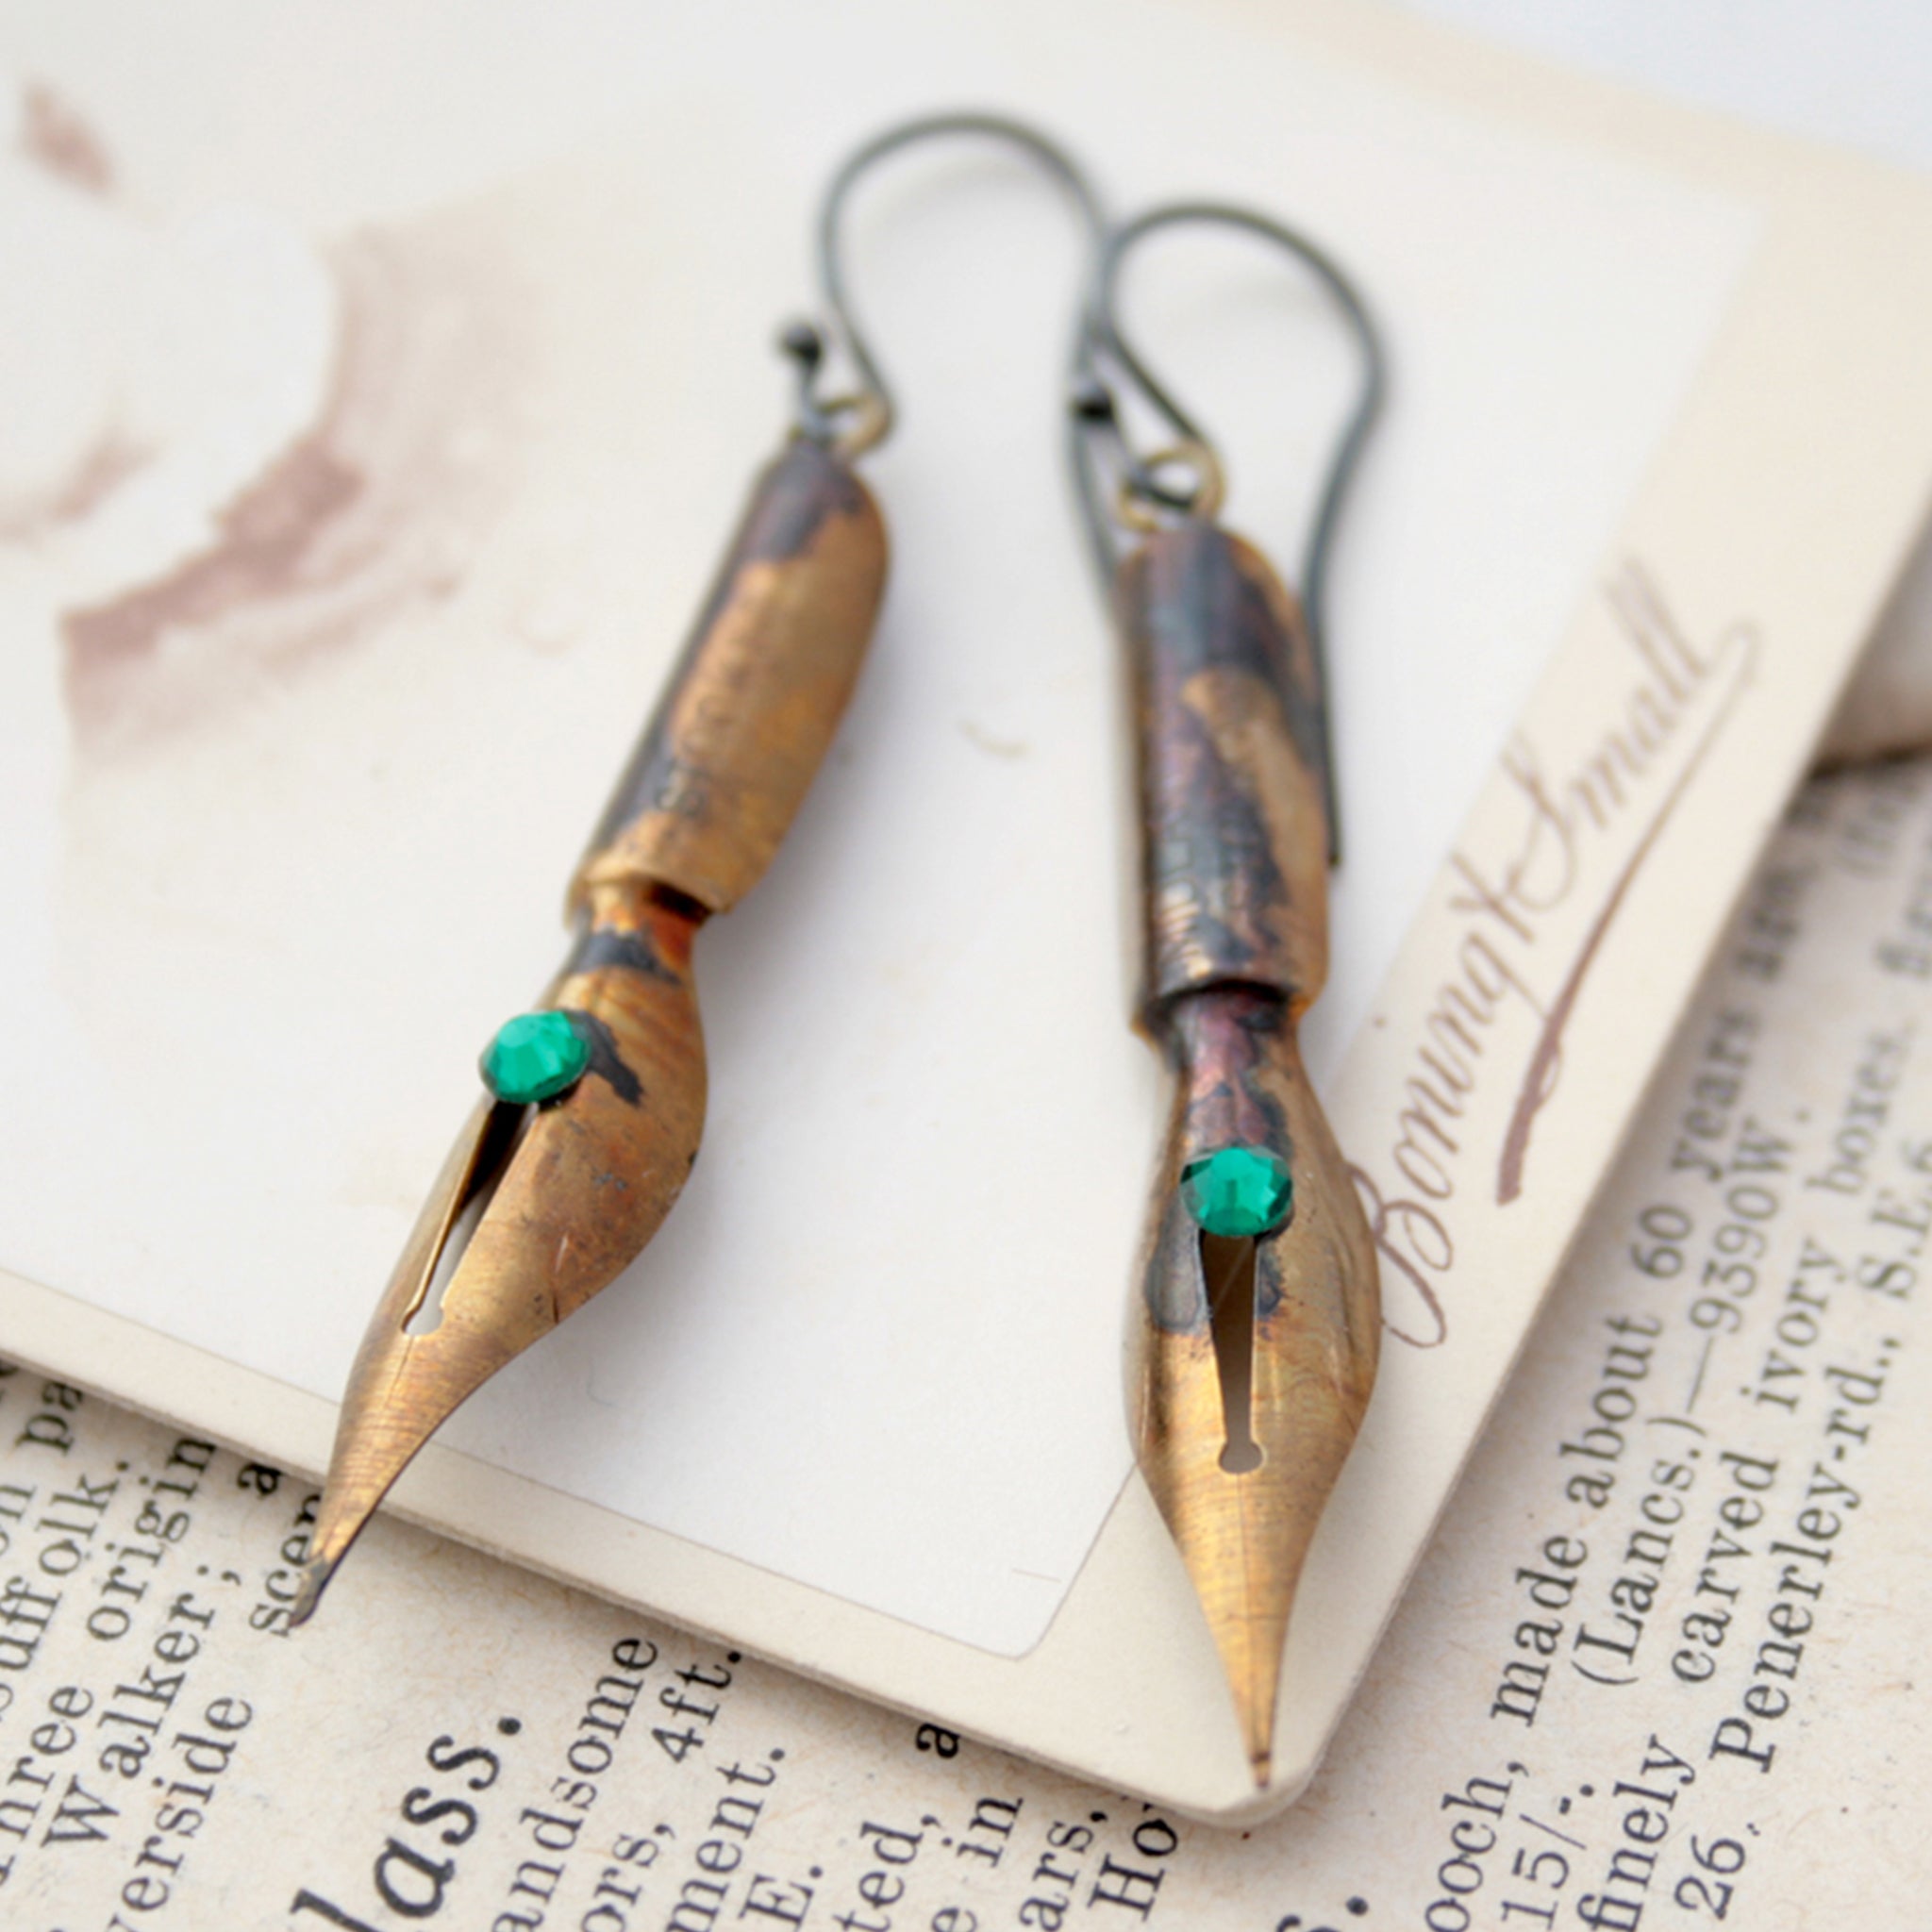 gold earrings made of real pen nibs with turquoise crystals lying on an old photograph